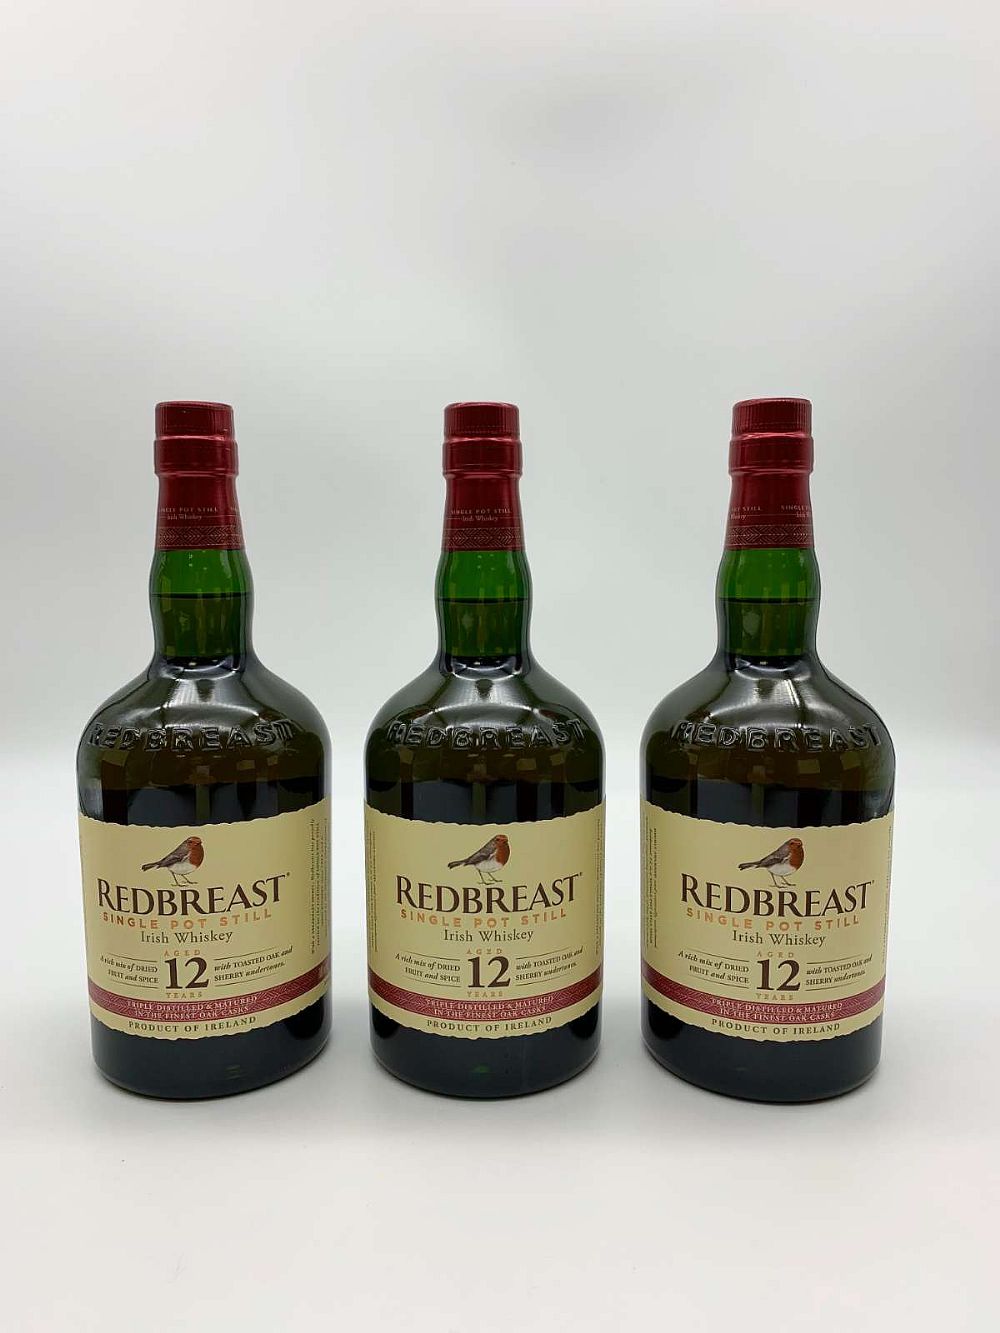 Redbreast 12 year old (new label, 3 bottle case)